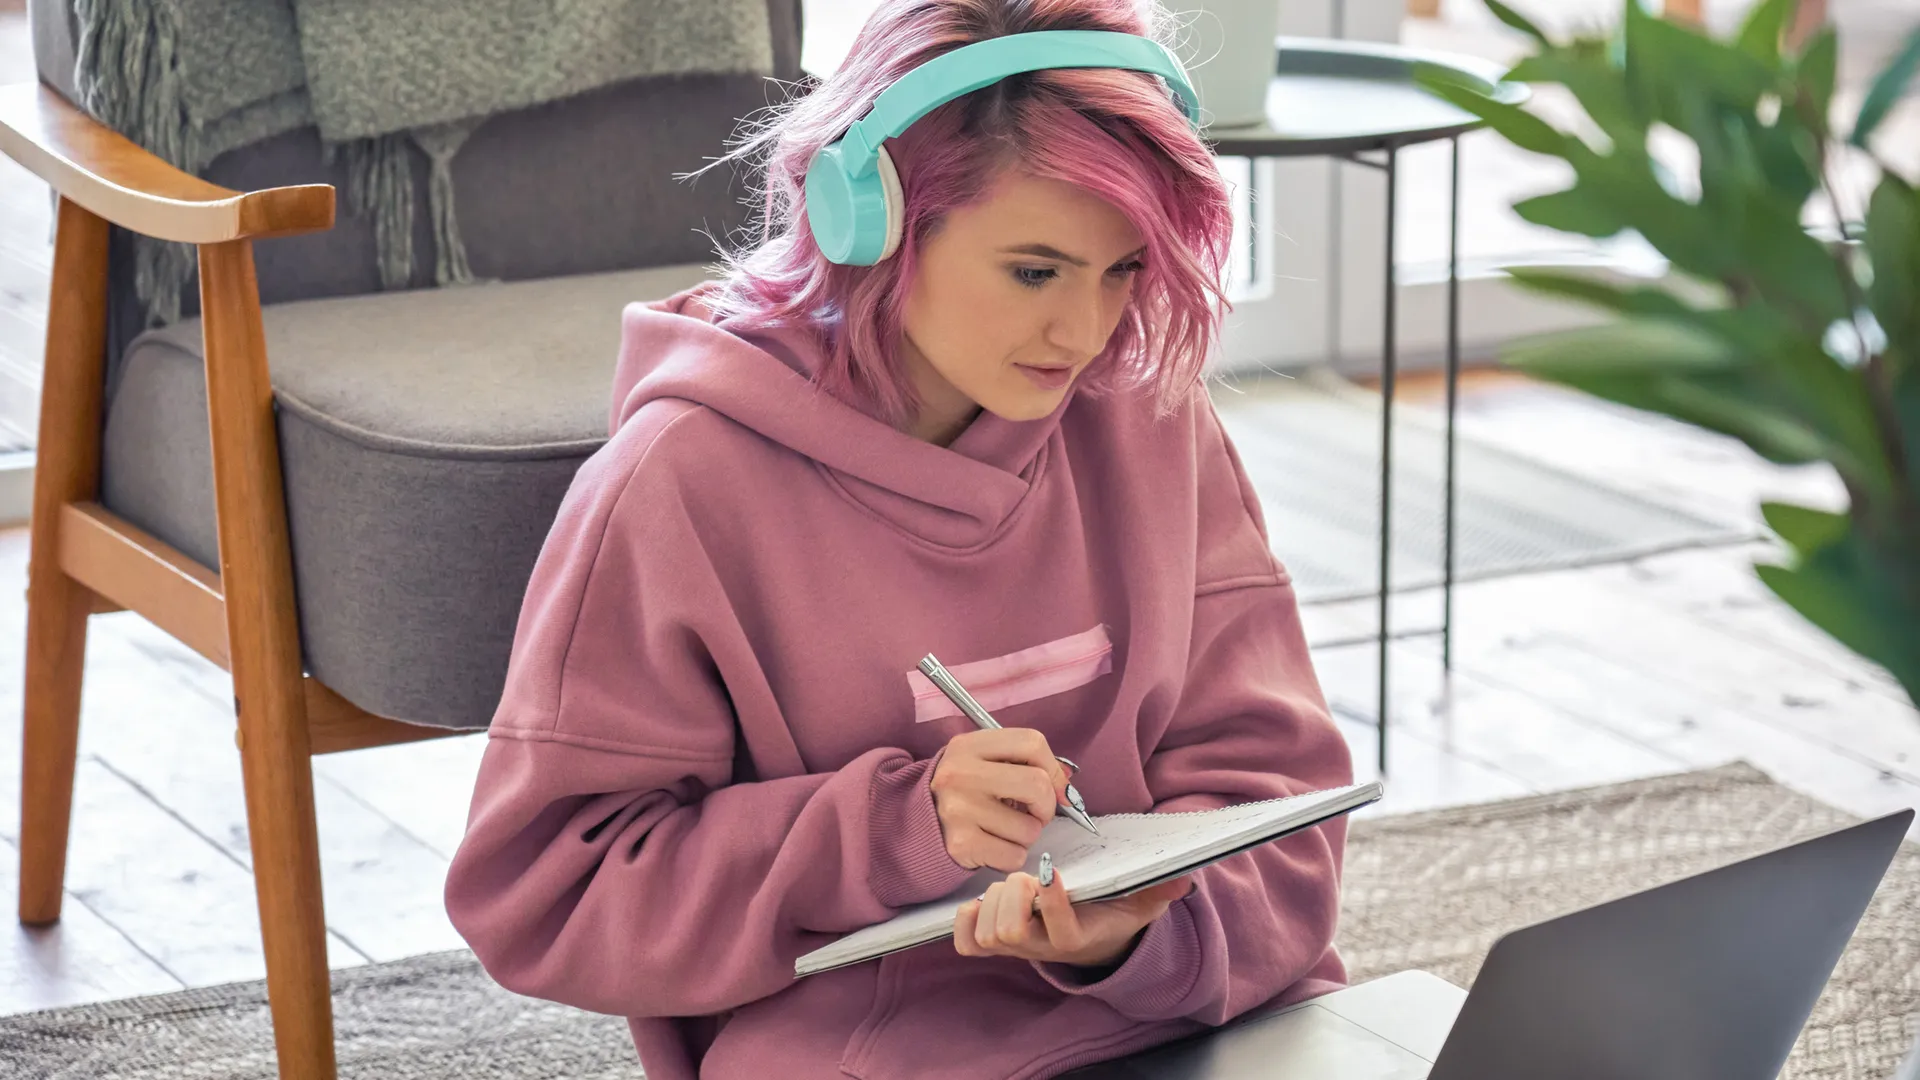 Focused hipster teen girl school college student pink hair wear headphones write notes watching webinar online video conference calling on laptop computer sit on floor working learning online at home.